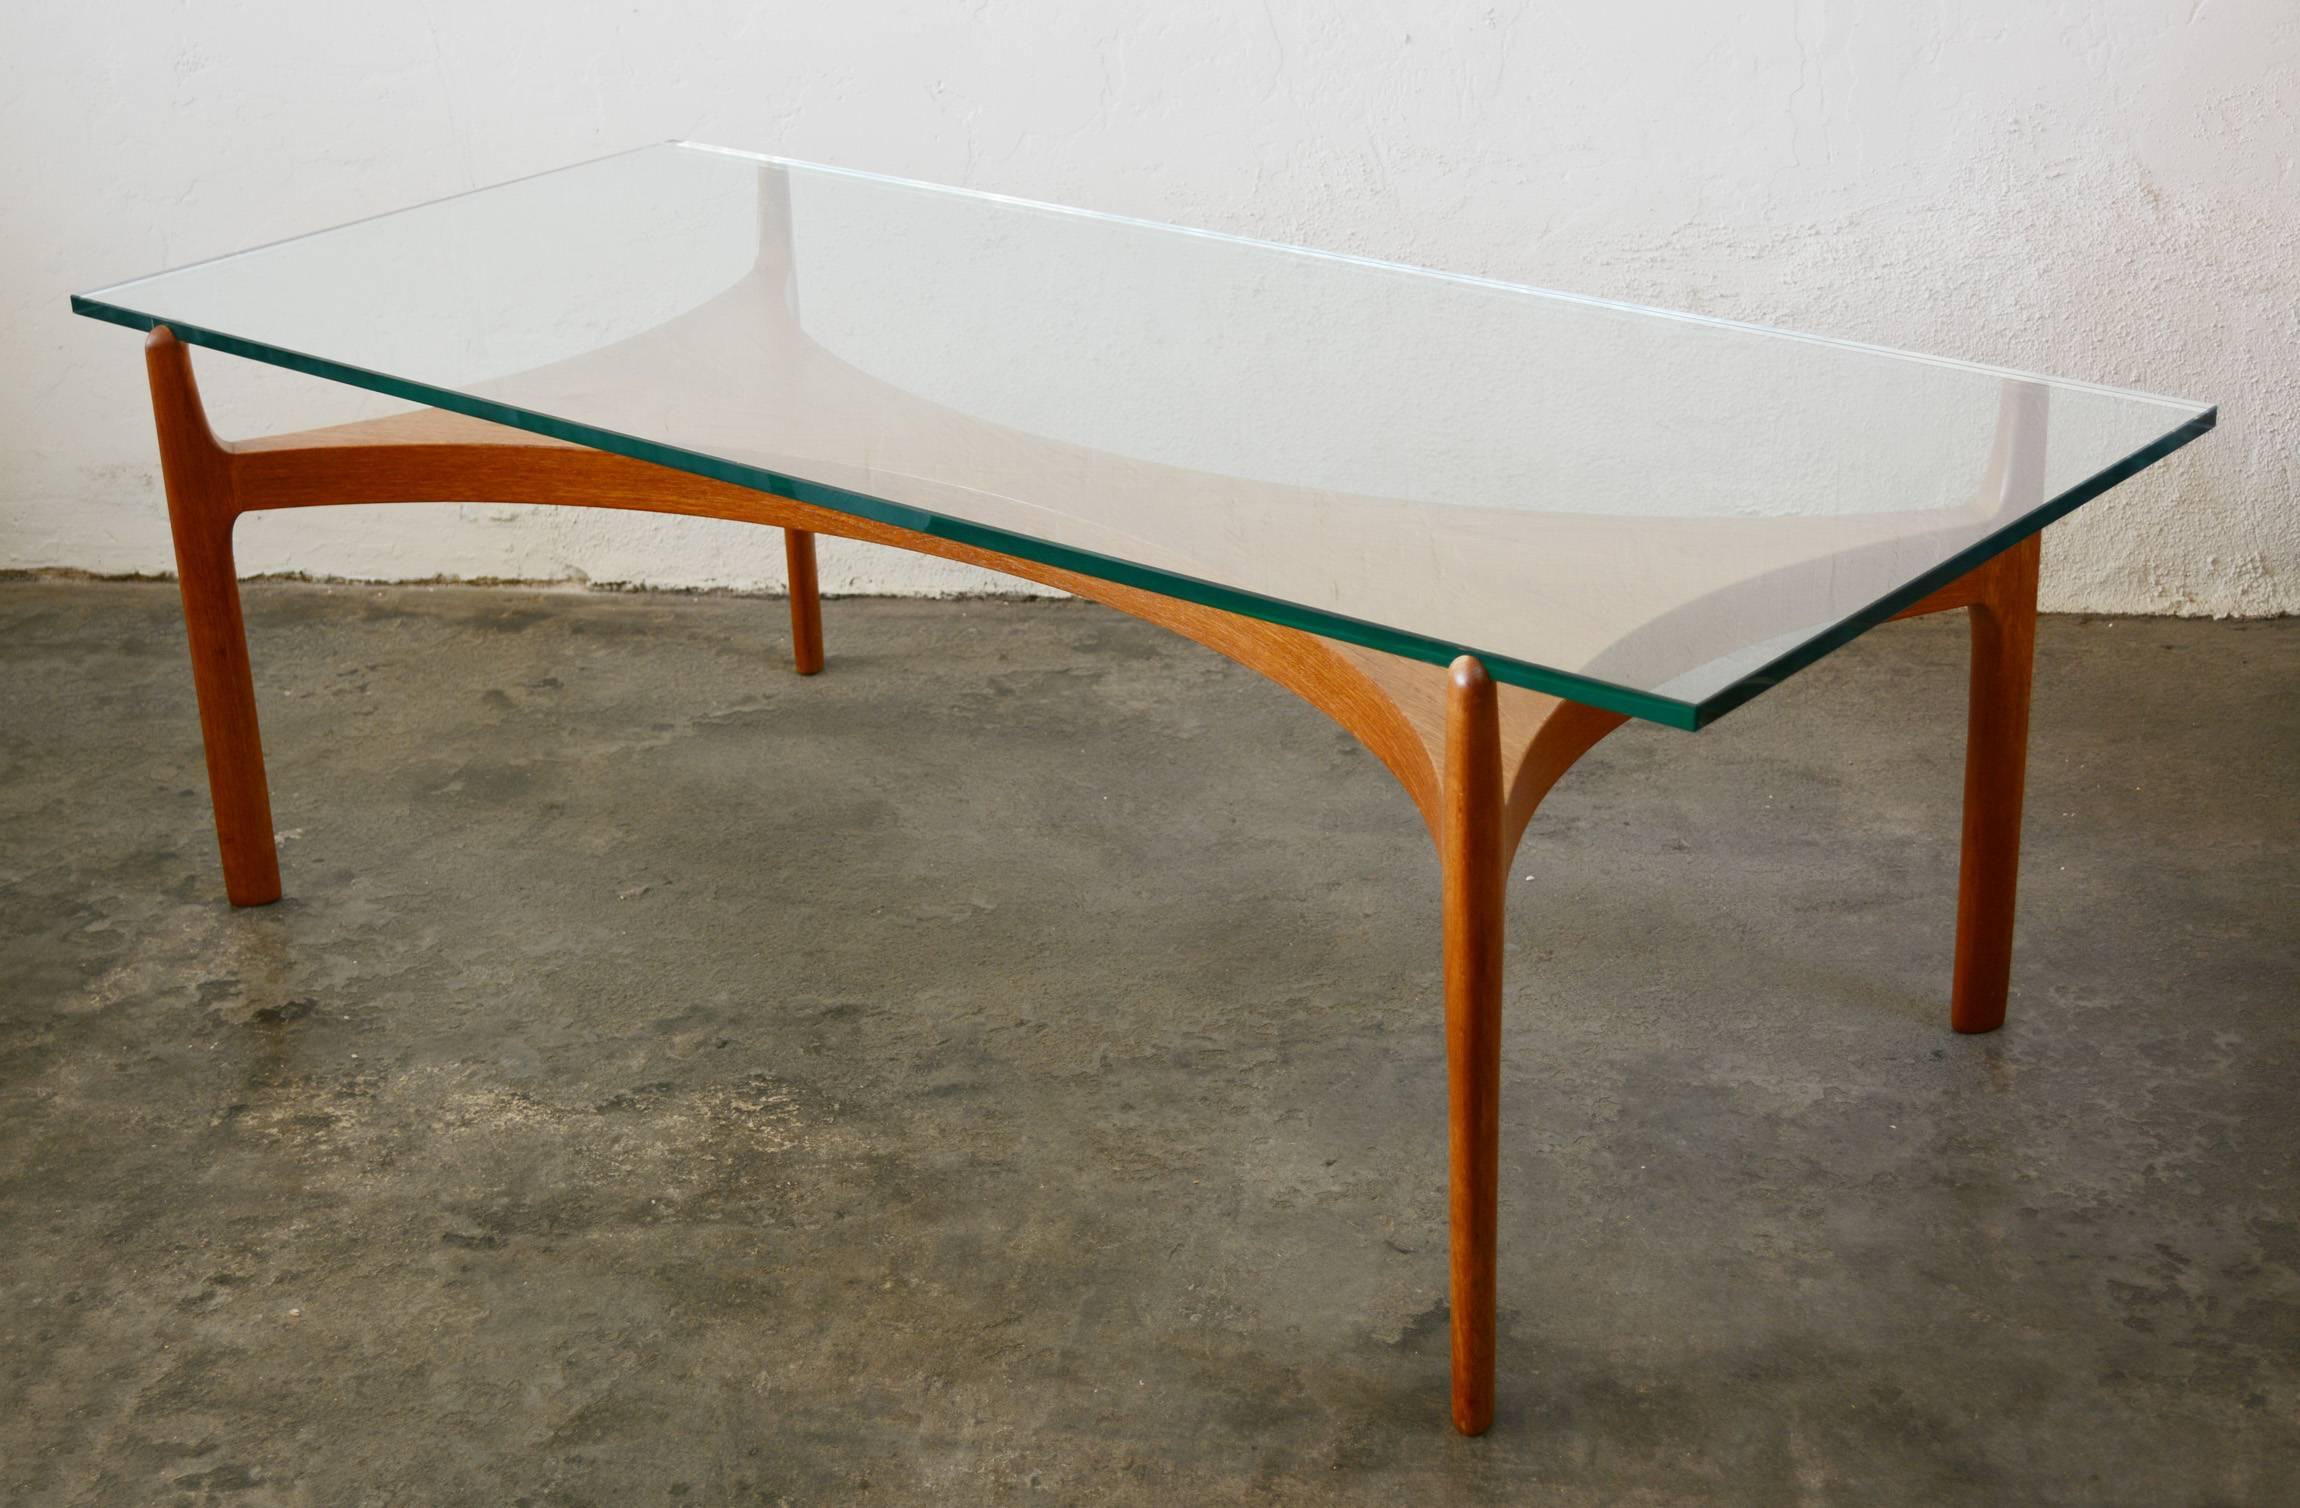 A half inch thick glass floats above a teak base on this table by Sven Ellekaer.